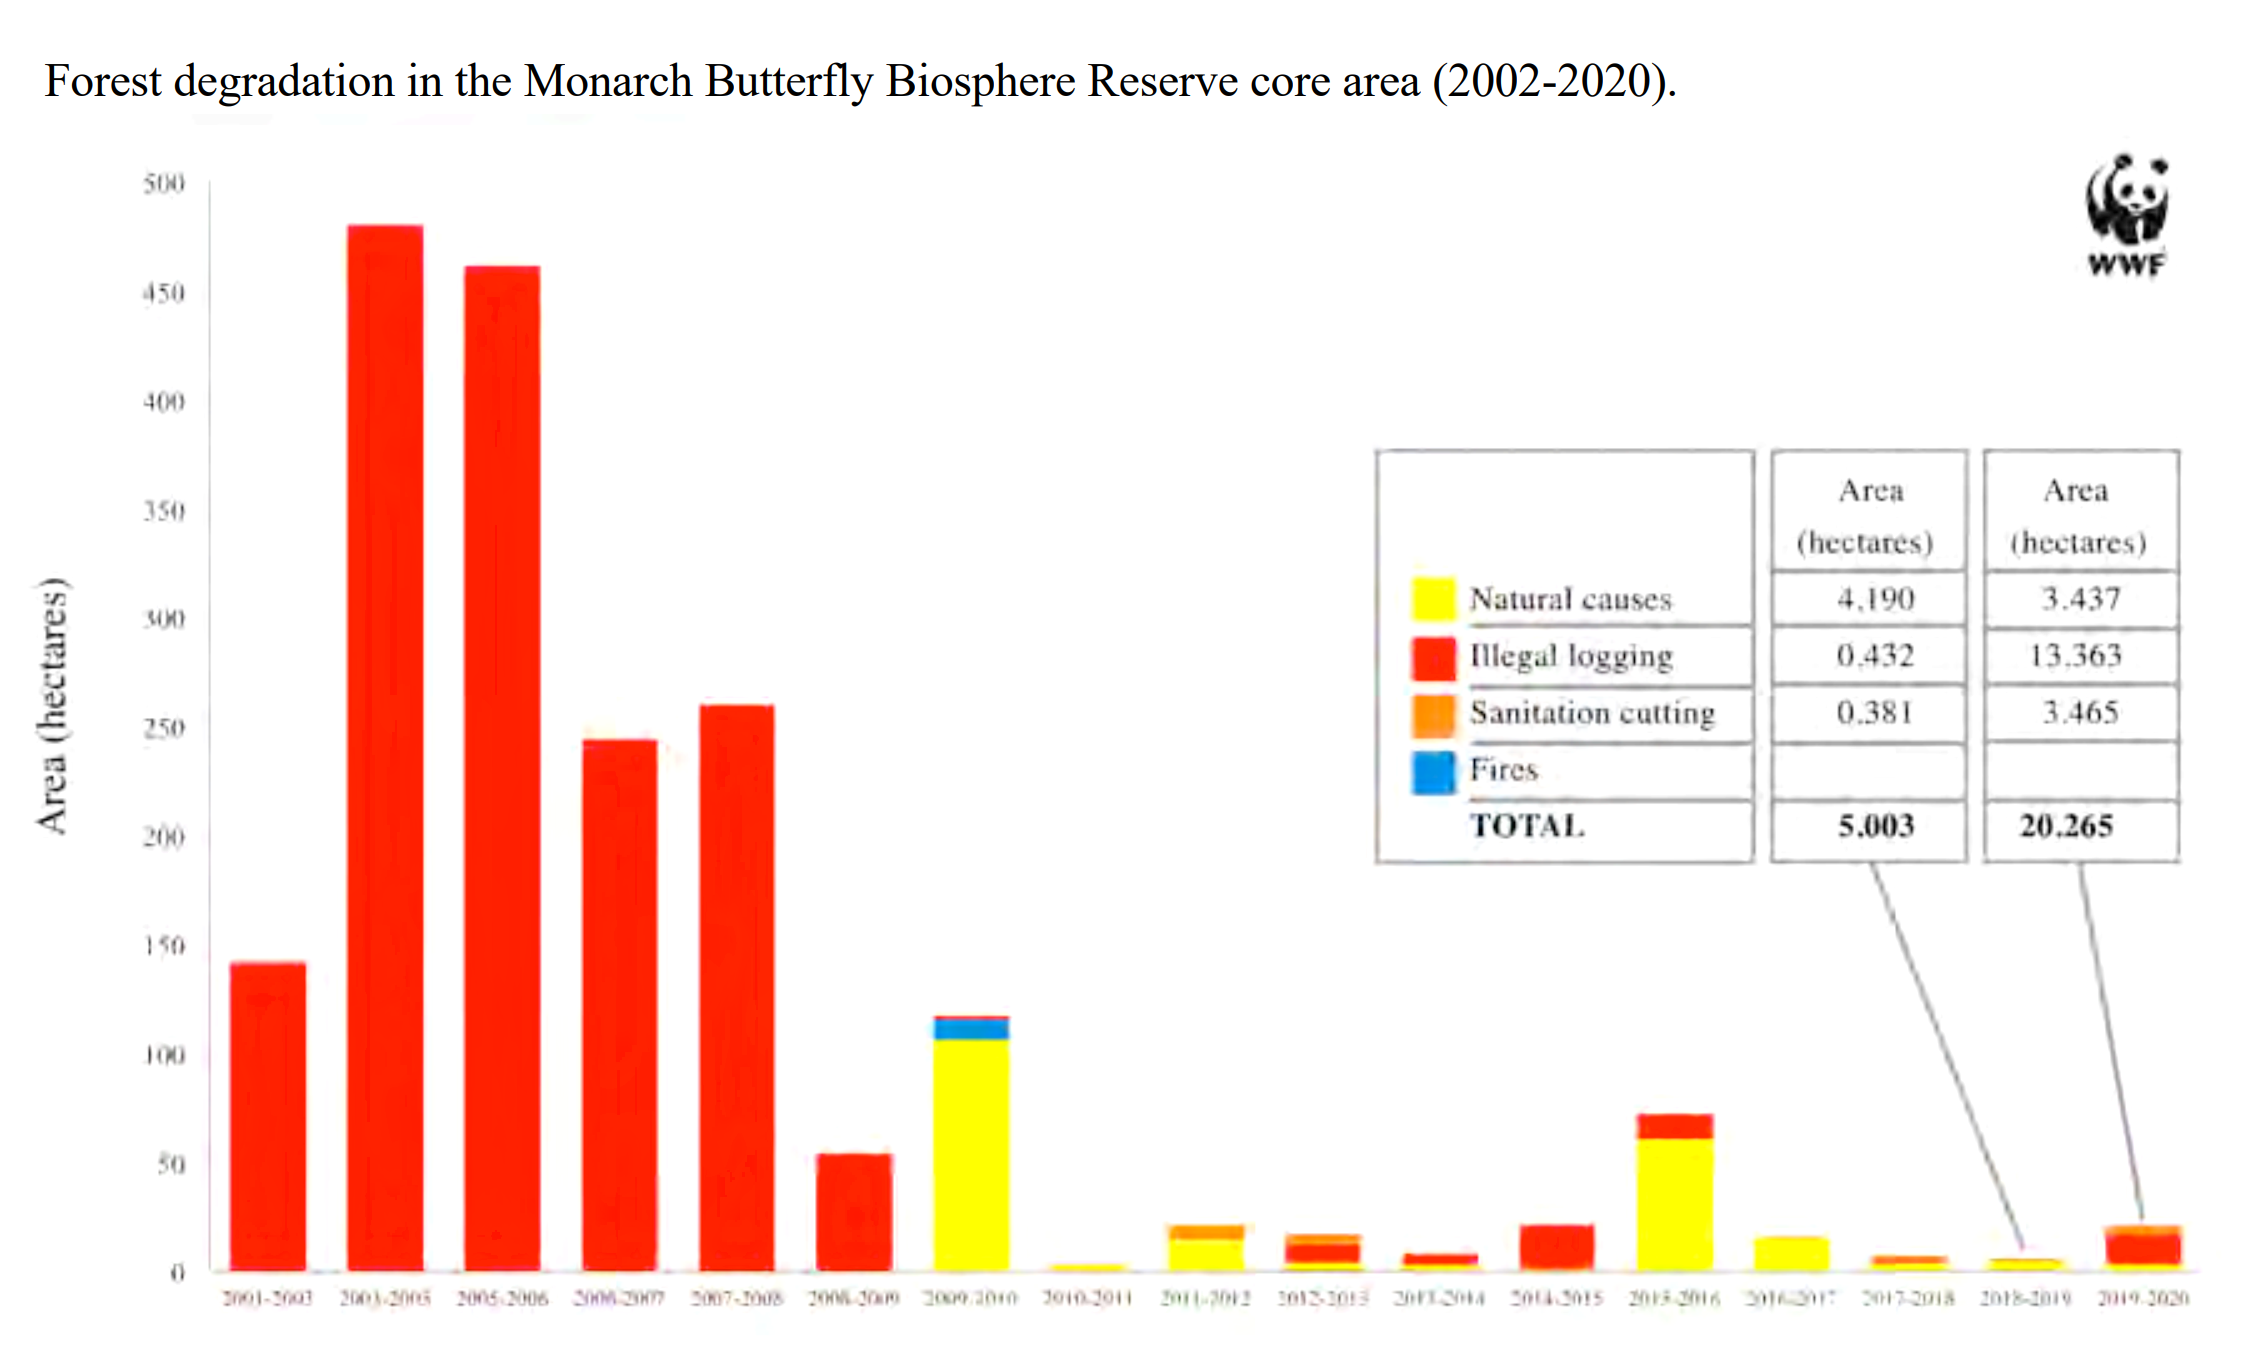 Forest degradation in the Monarch Butterfly Biosphere Reserve core area, 2002-2020. The presence of the Monarch butterfly in the Mexican hibernation forests decreased by 26 percent last December, occupying 2.10 hectares (ha) compared to the 2.83 hectares reported during the same month in 2019. Meanwhile, the core forest area in the Monarch Butterfly Biosphere Reserve (MBBR) where the lepidopteran establishes the main hibernation colonies recorded, between March 2019 and March 2020, 20.26 ha of degradation, four times more than in 2018-2019 when 5 ha were degraded. Graphic: WWF